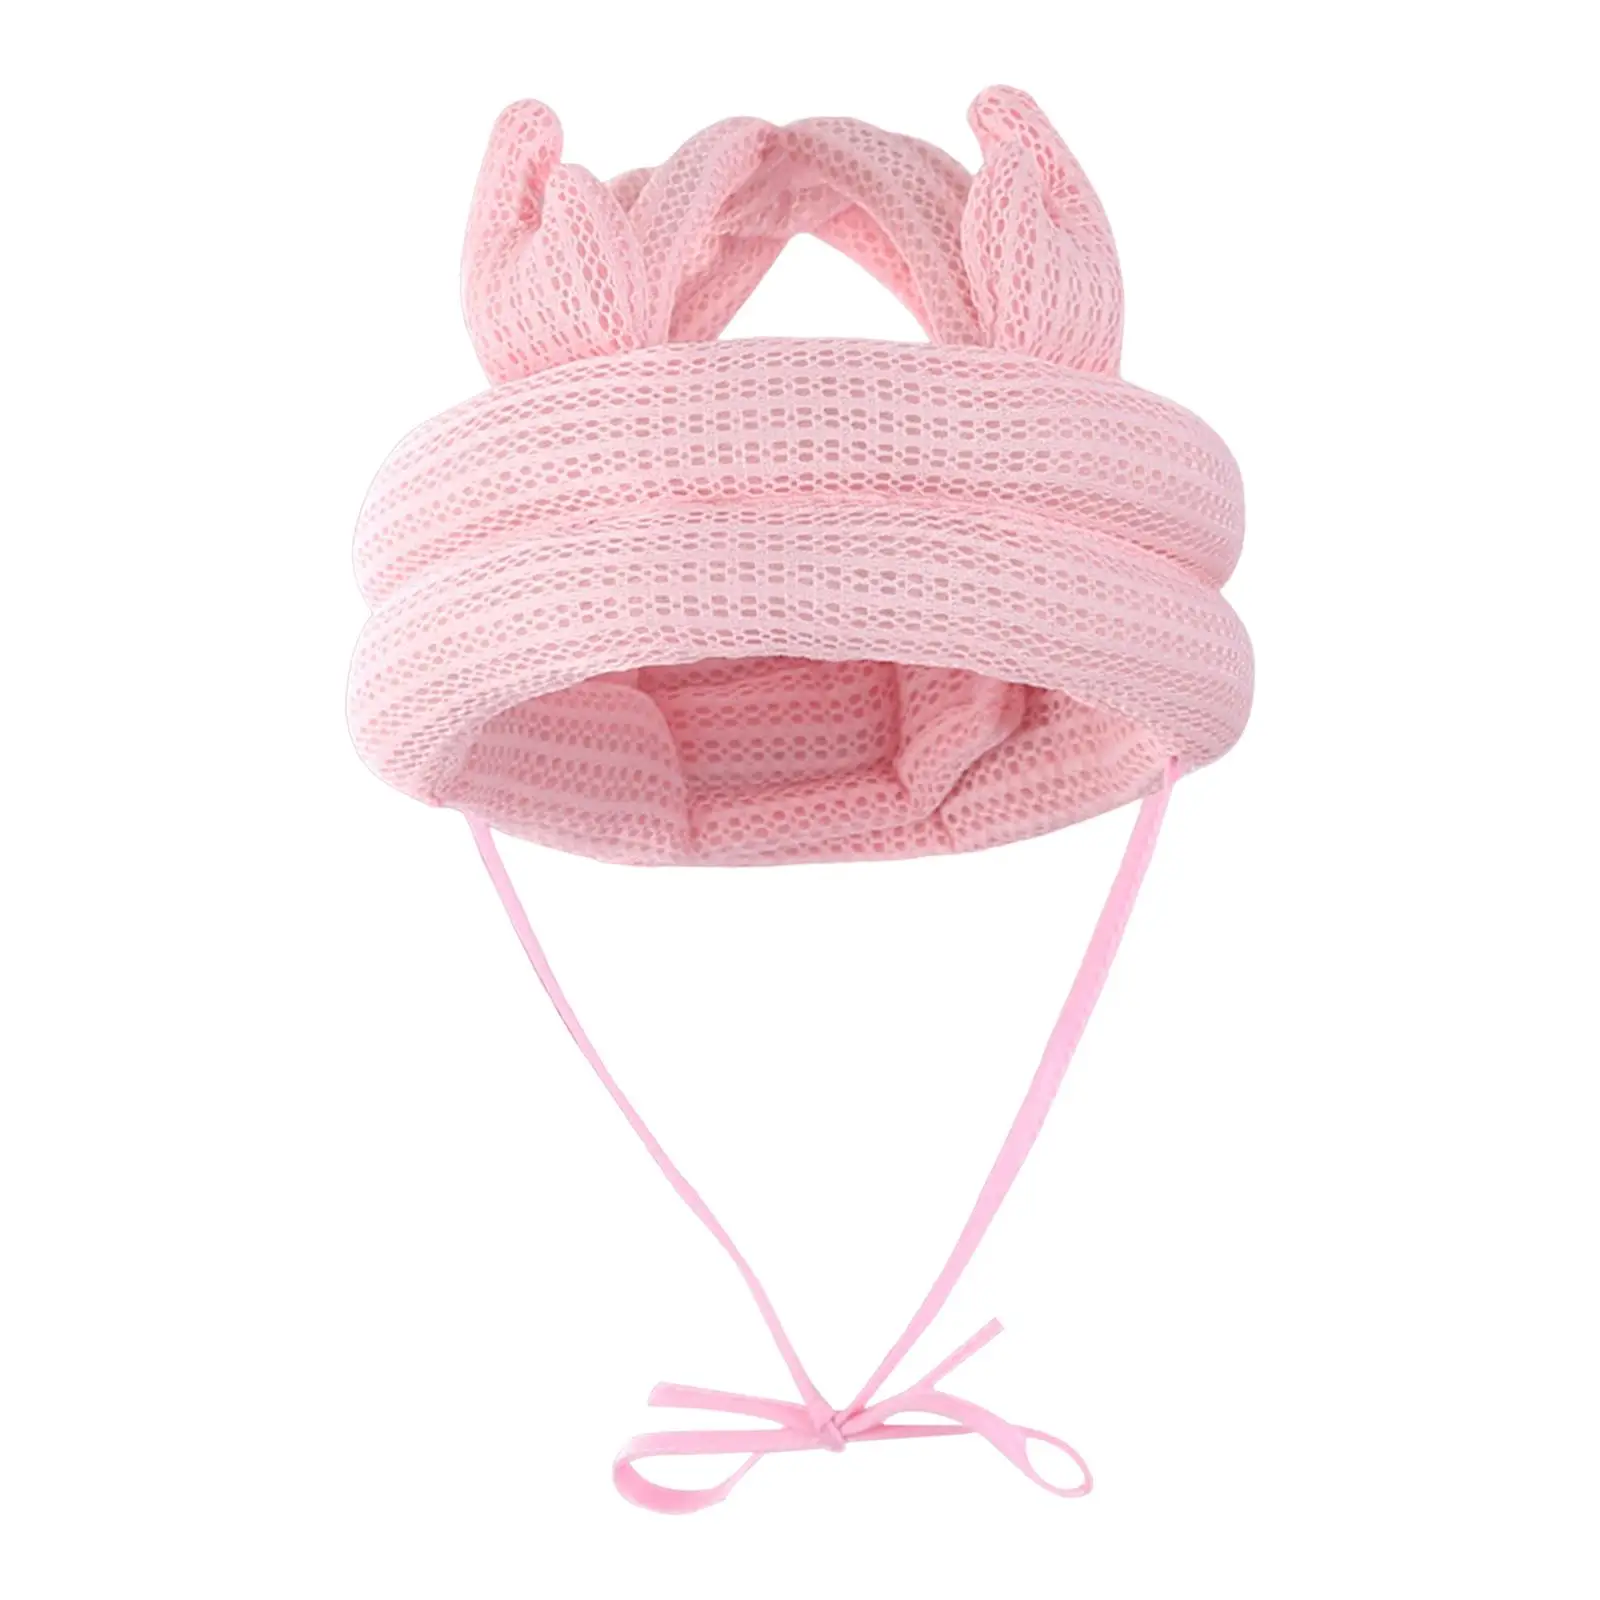 Infant Head Protective Hat Baby Protective Cap for Kids Infant Walking